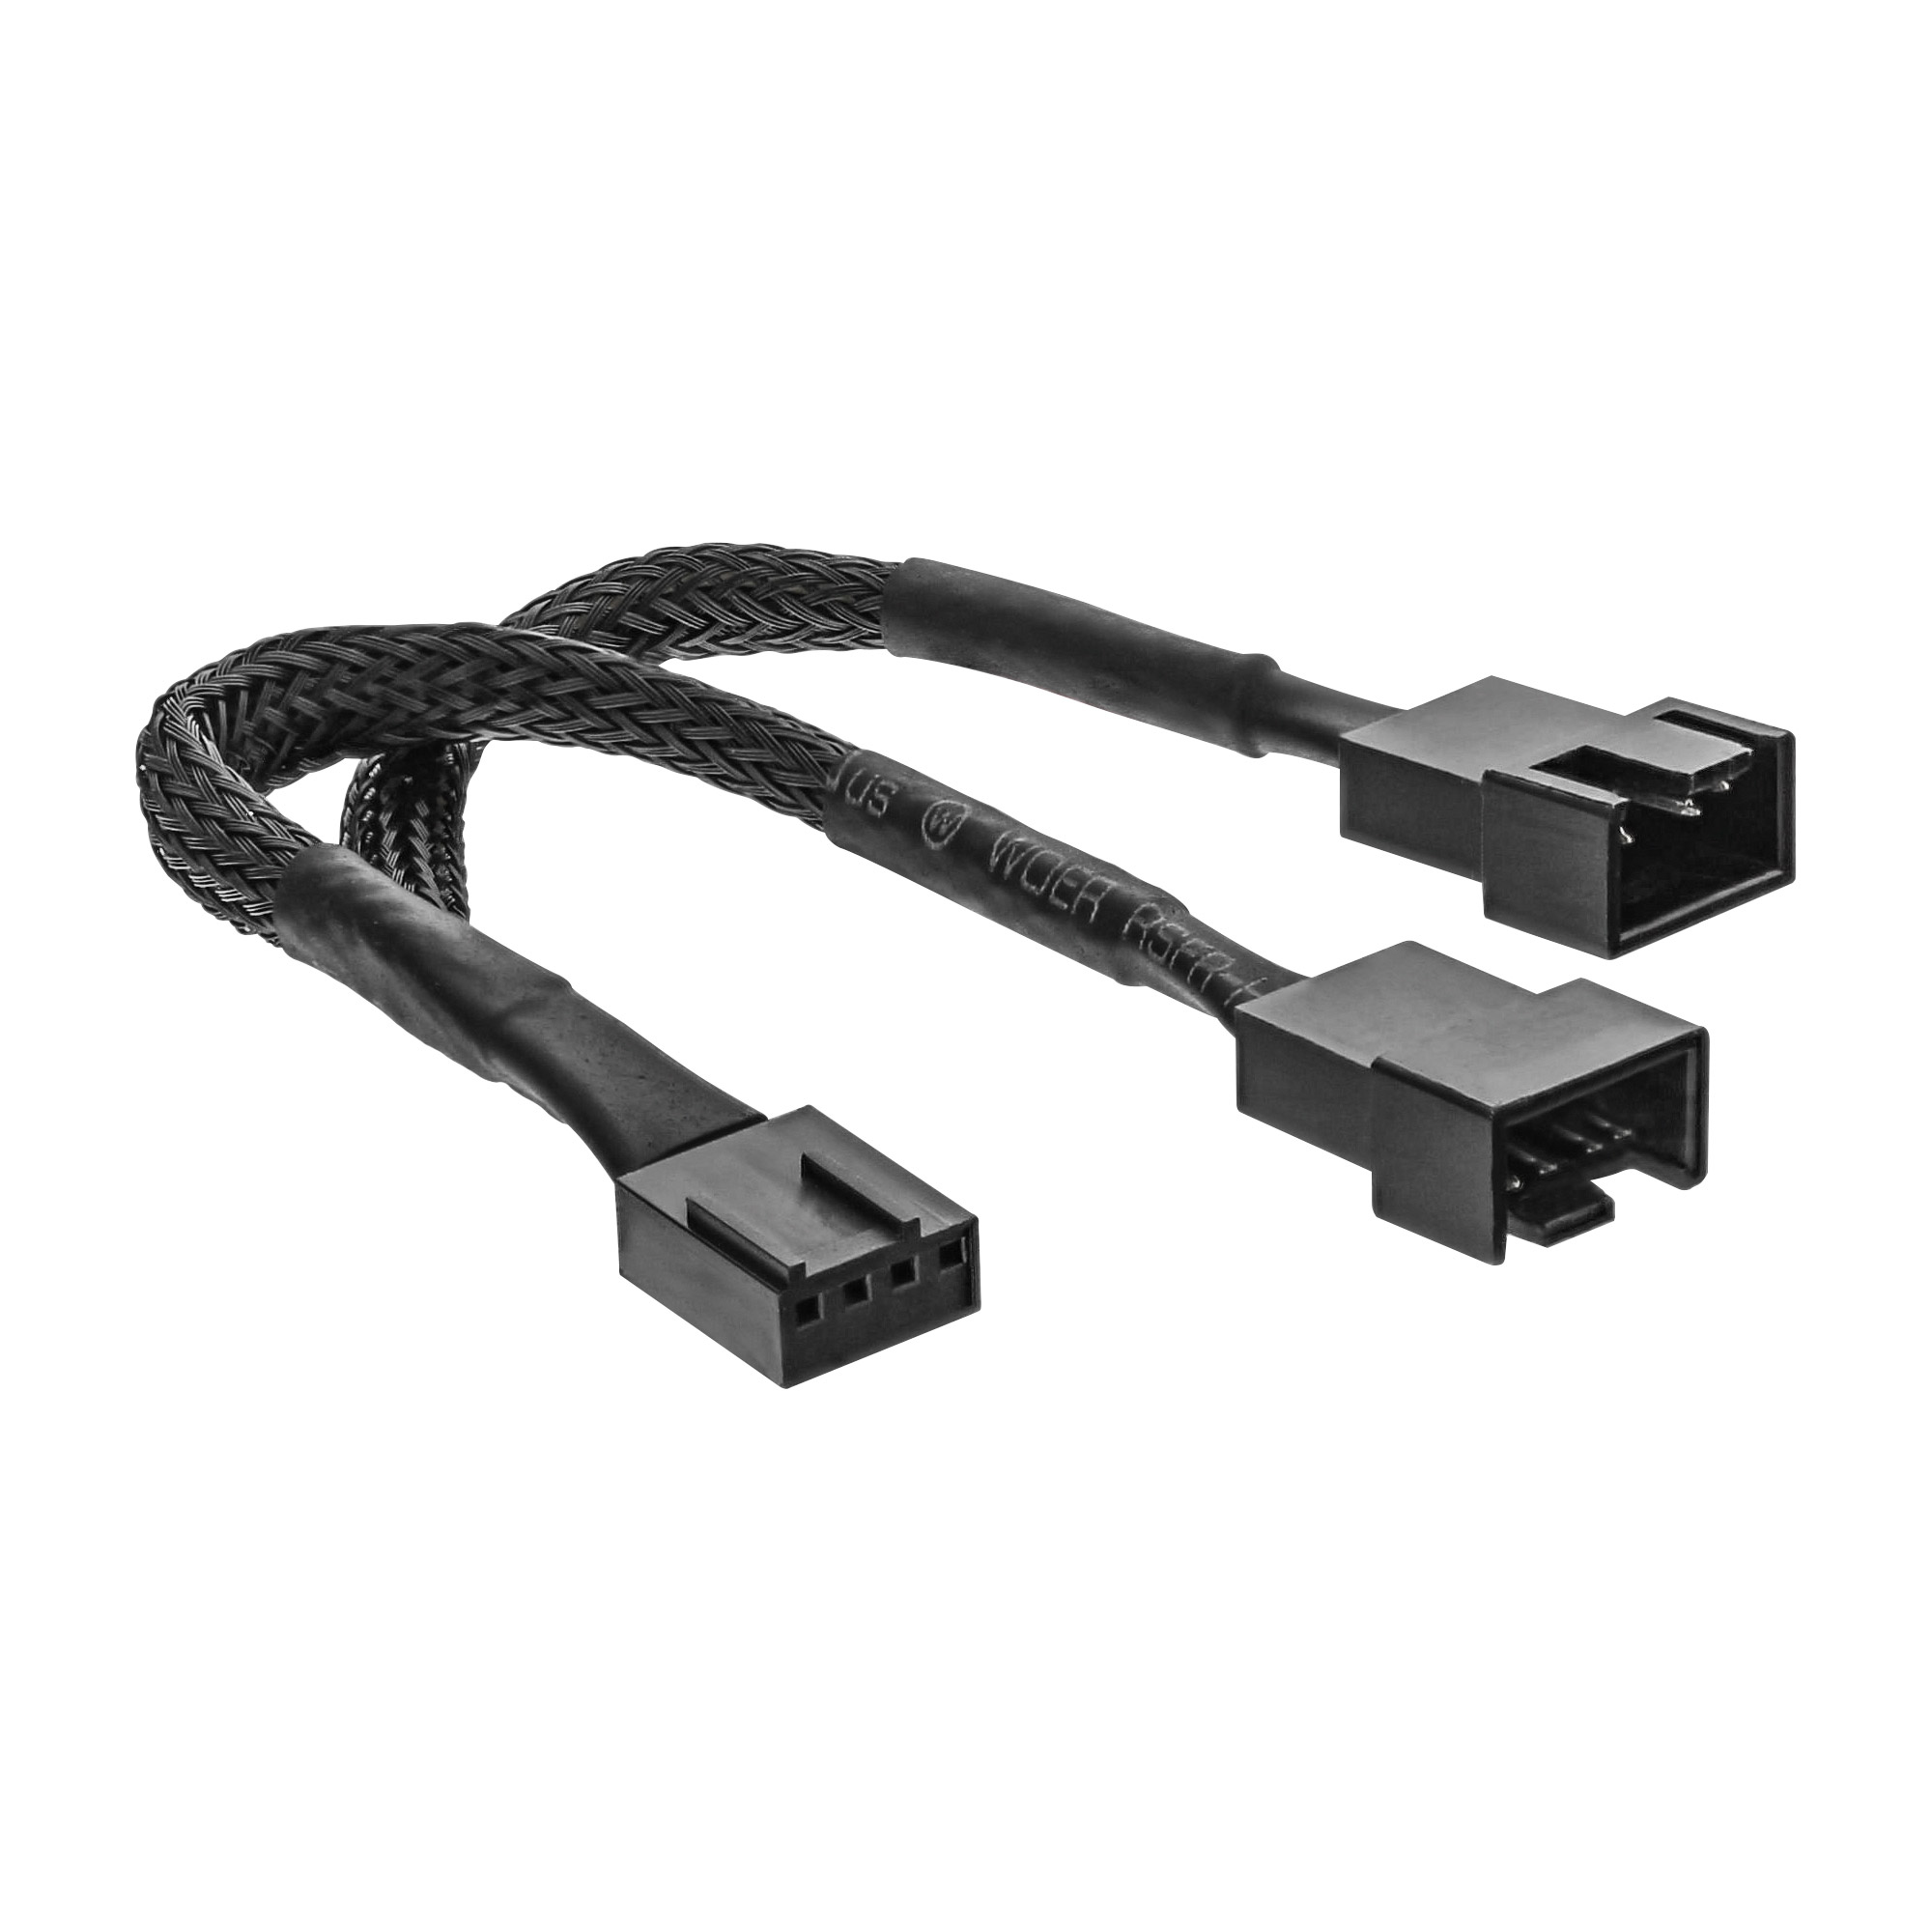 Photos - Cable (video, audio, USB) InLine PWM fan power y-cable, 4pin. 1M/2F, 0.15m 33328Y 